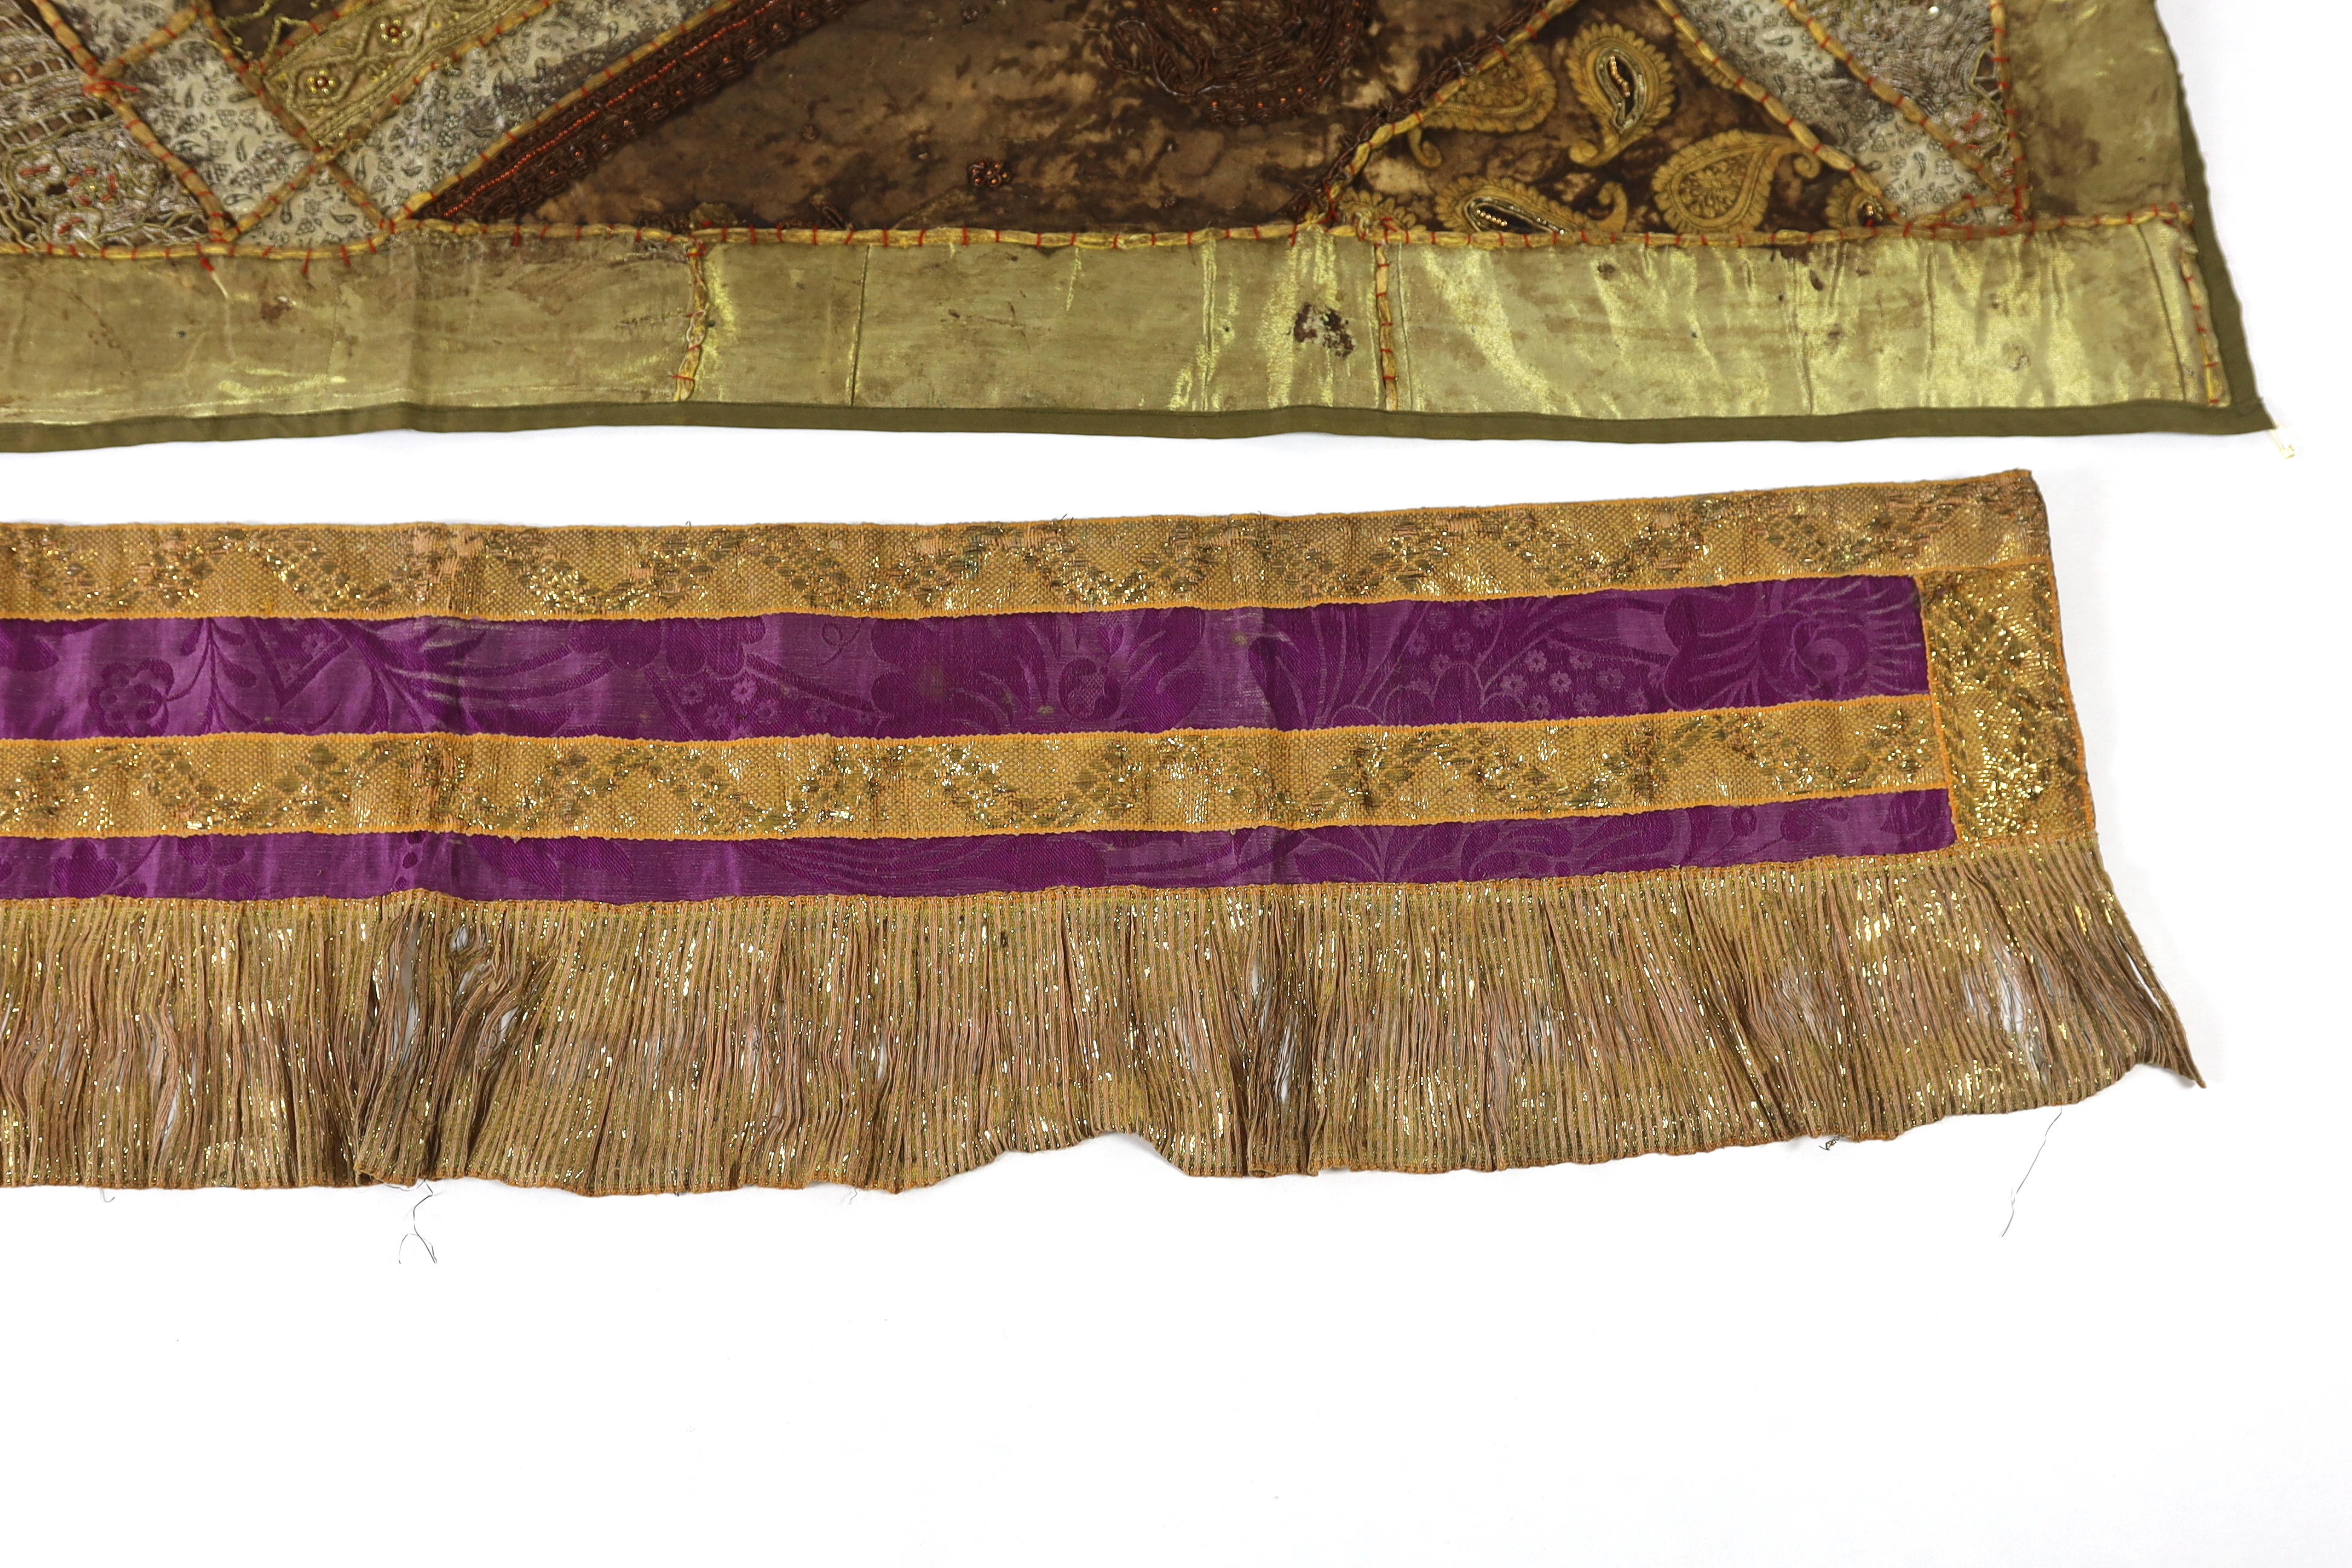 A 20th century Indian patchwork hanging, designed in golds and browns using patchwork batik, beadwork and metallic embroidery, each bordered with thick silk strands bound together, the hanging then bordered with gold met